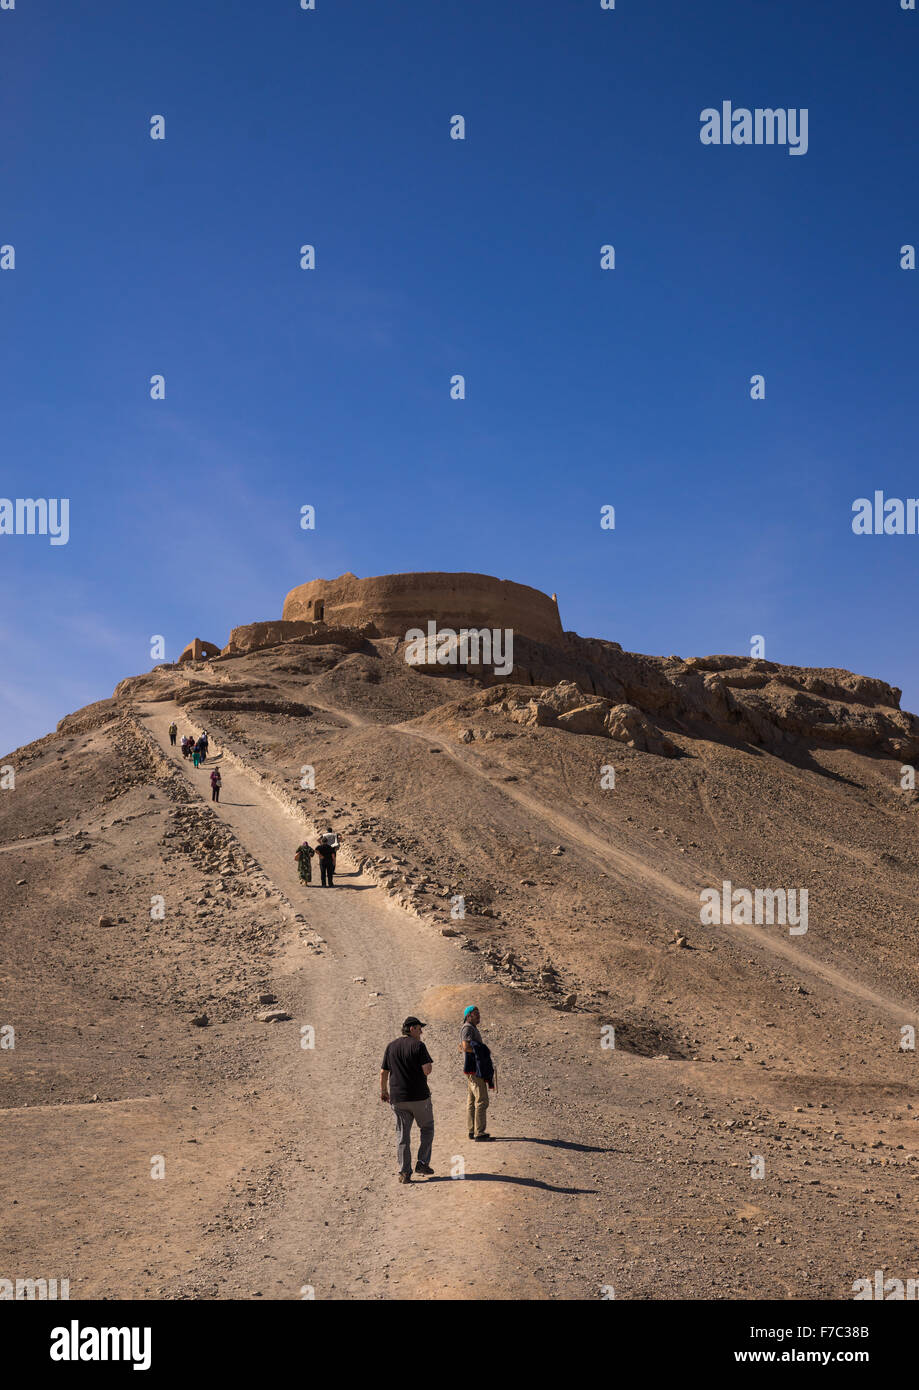 Tower Of Silence Where Zoroastrians Brought Their Dead And Vultures Would Consume The Corpses, Yazd Province, Yazd, Iran Stock Photo